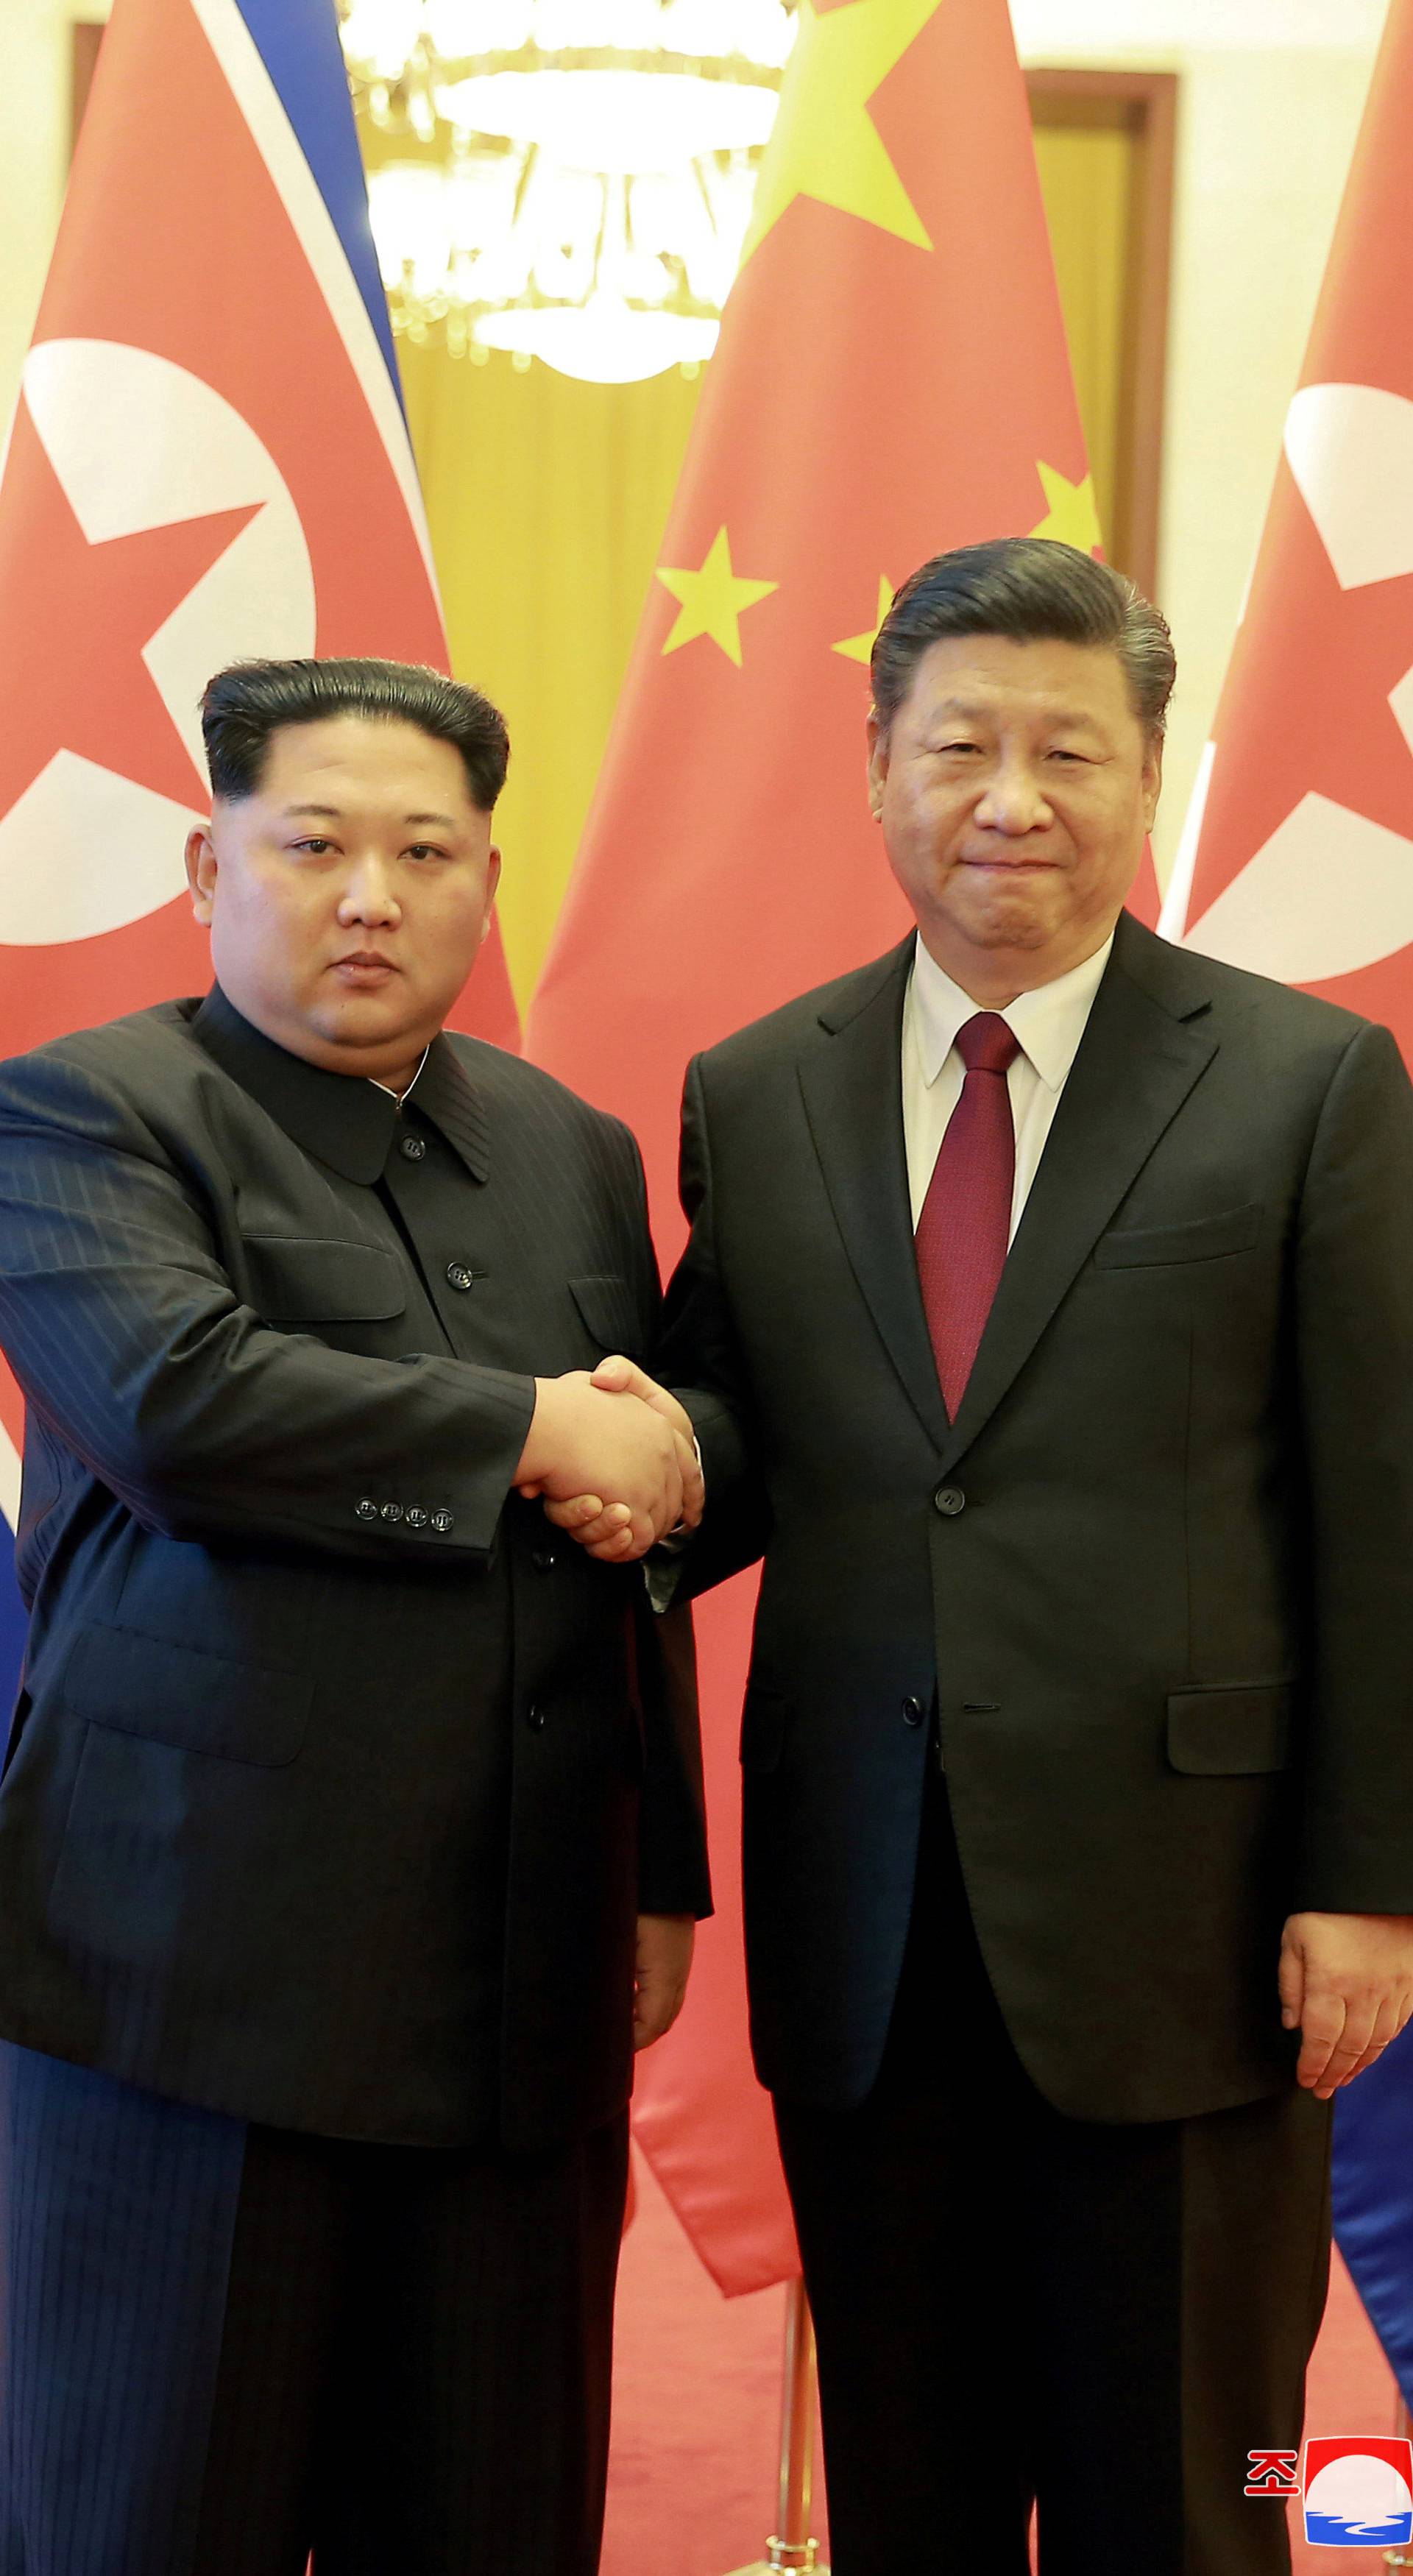 North Korean leader Kim Jong Un shakes hands with Chinese President Xi Jinping as he paid an unofficial visit to China